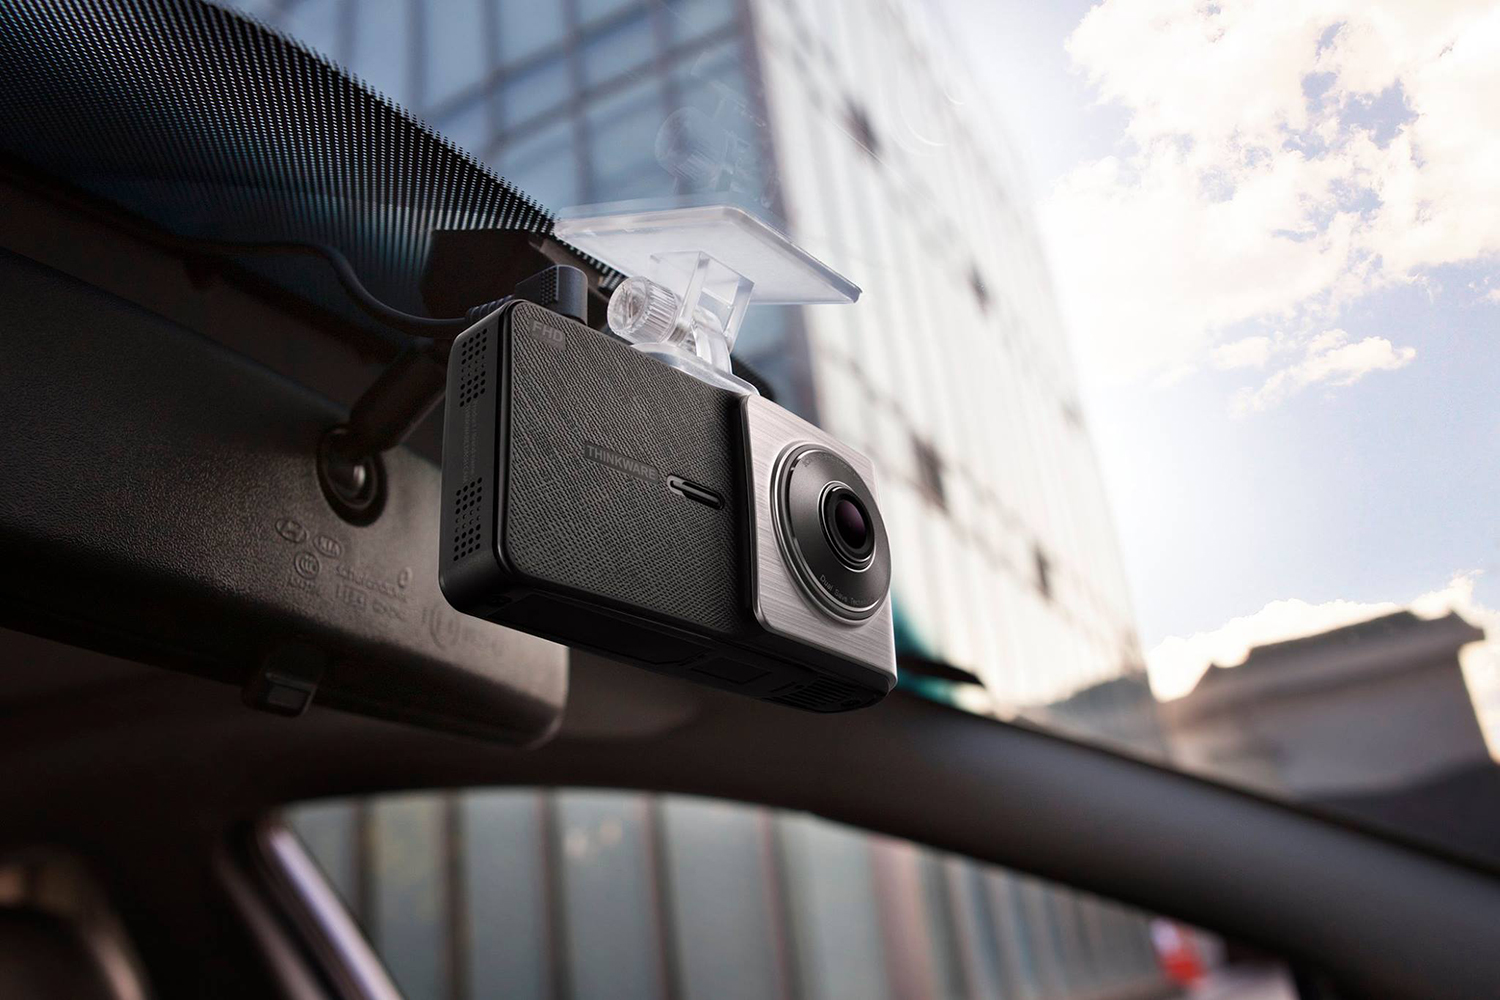 The best dash cams of 2019